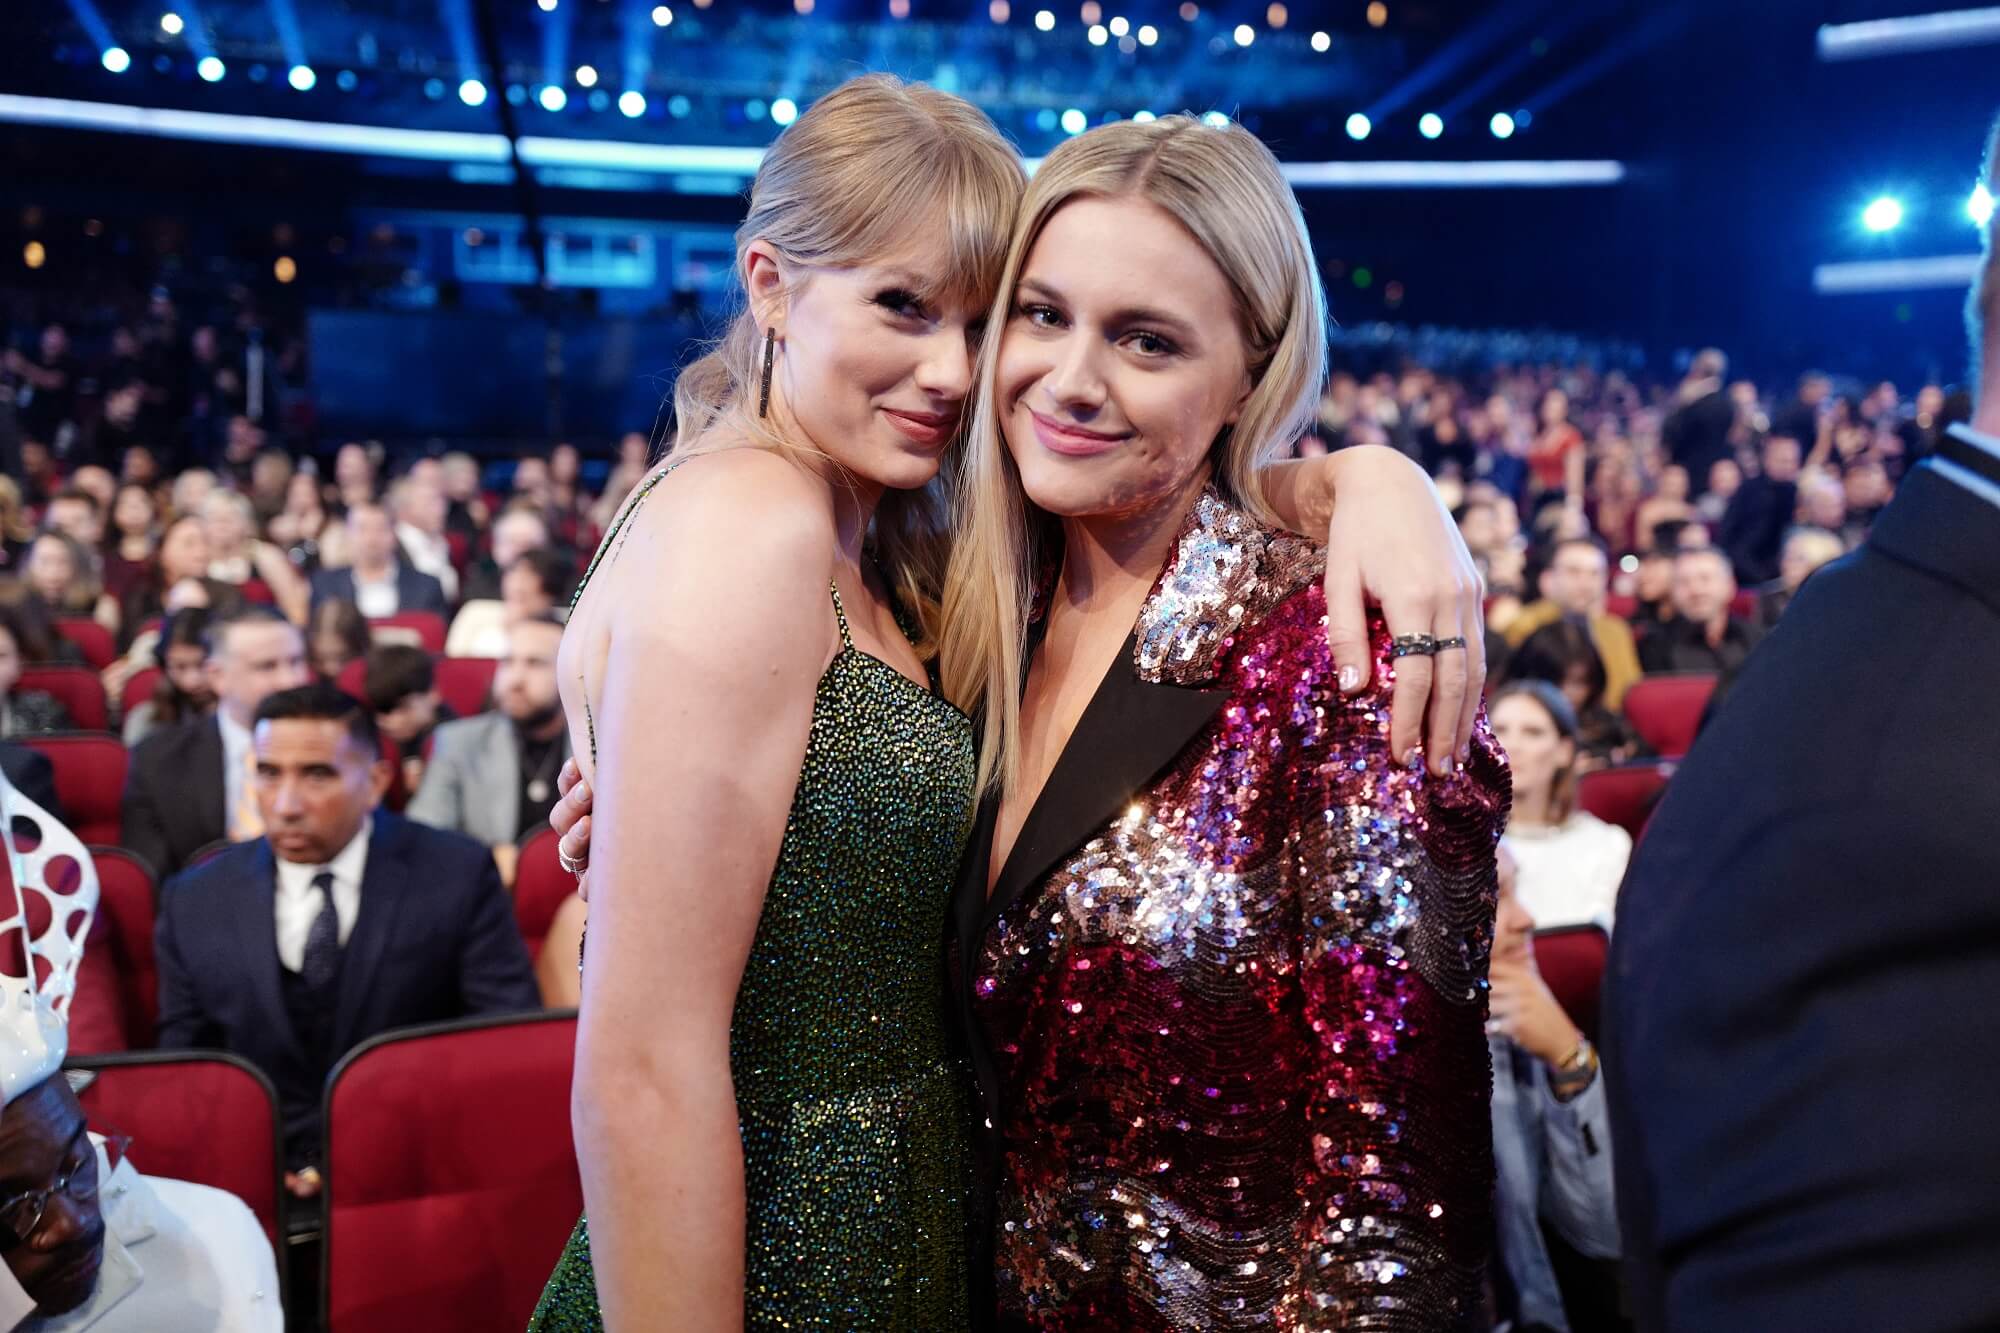 Taylor Swift and Kelsea Ballerini soft smile at the camera with their arms around each other